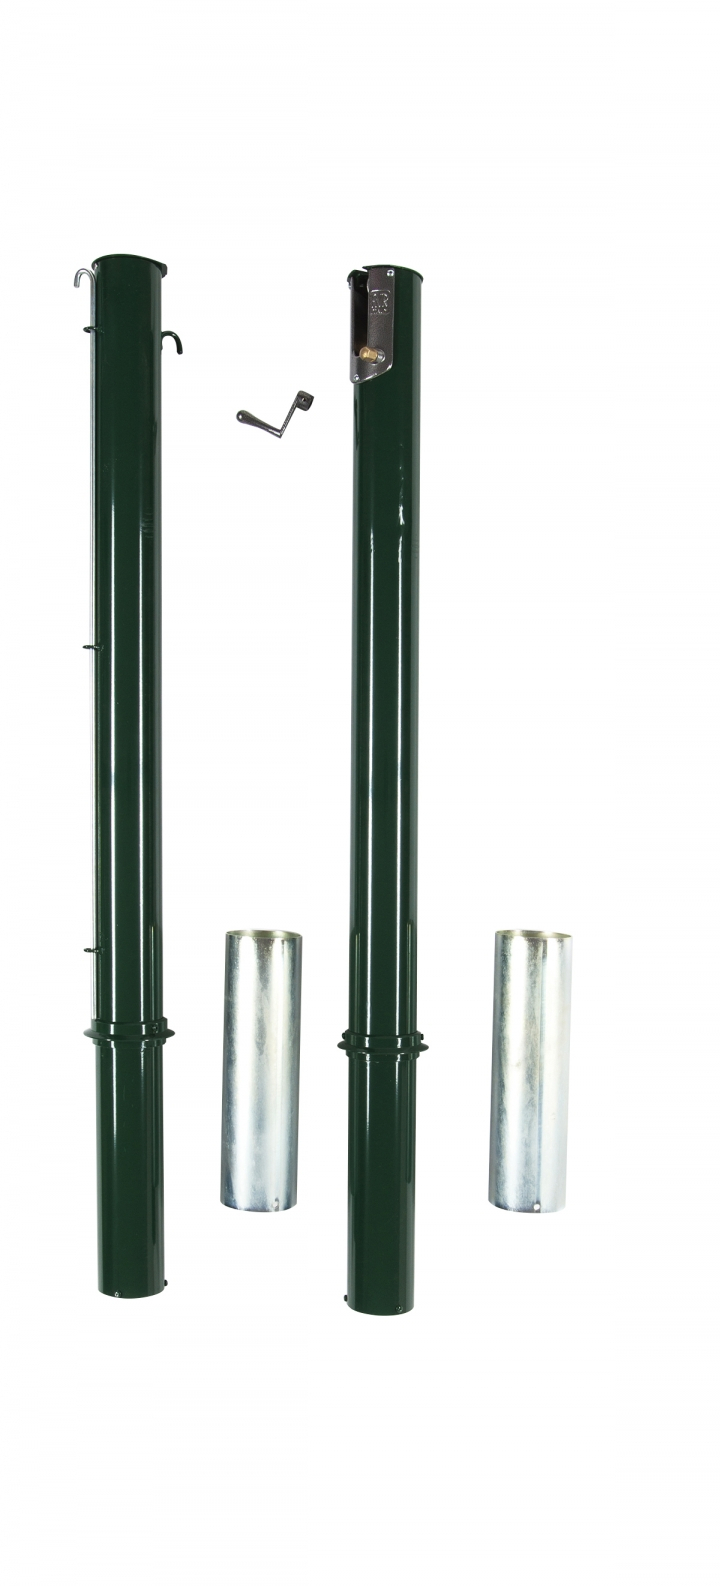 Round support posts for tennis nets